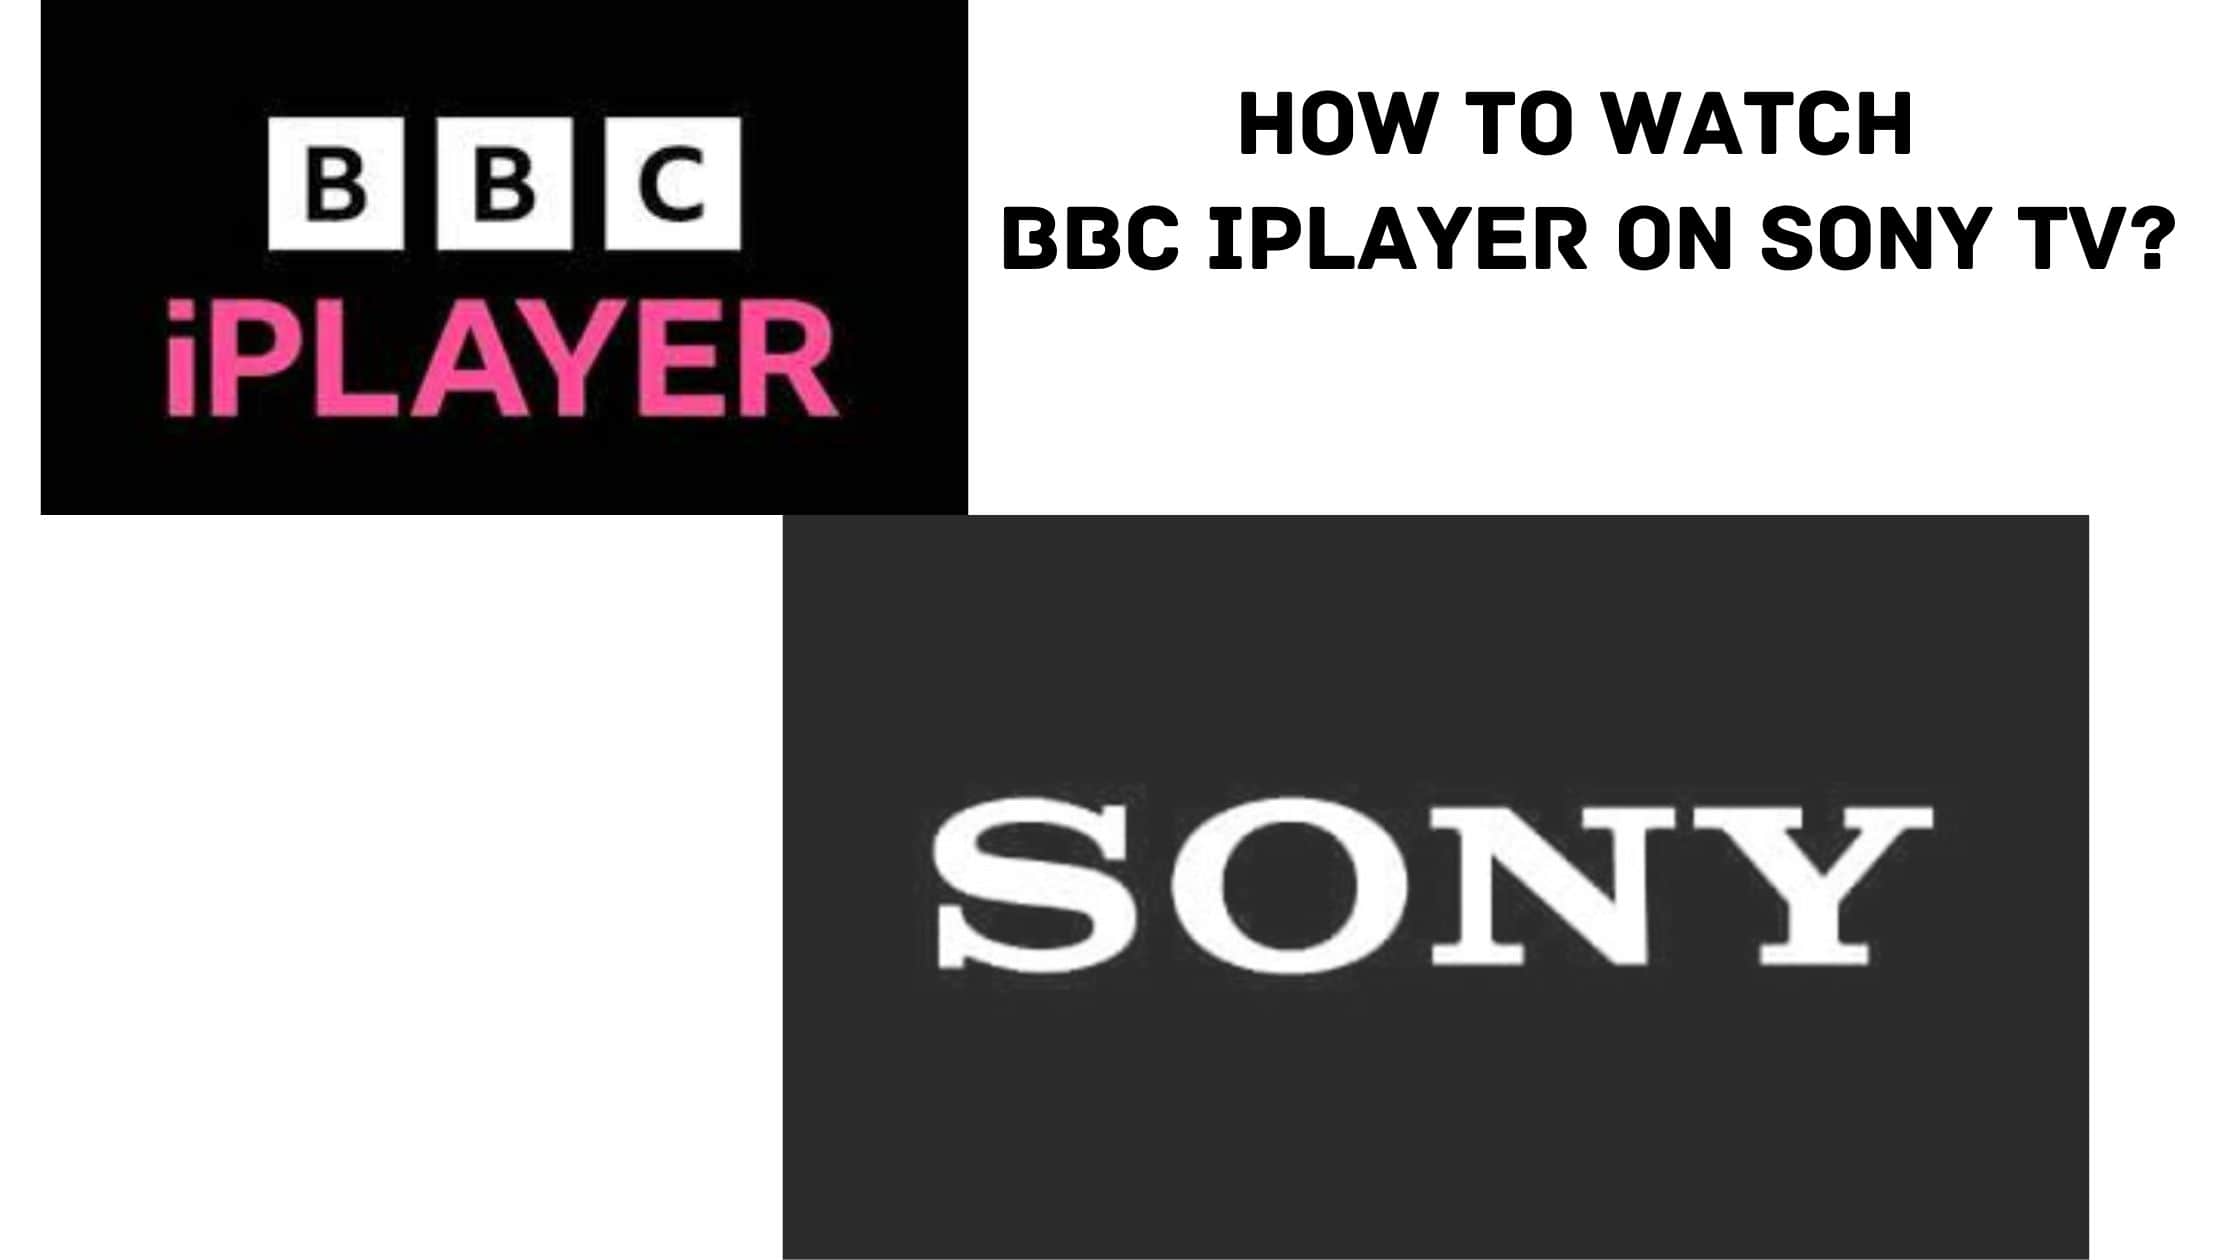 How to Watch BBC Iplayer on Sony TV